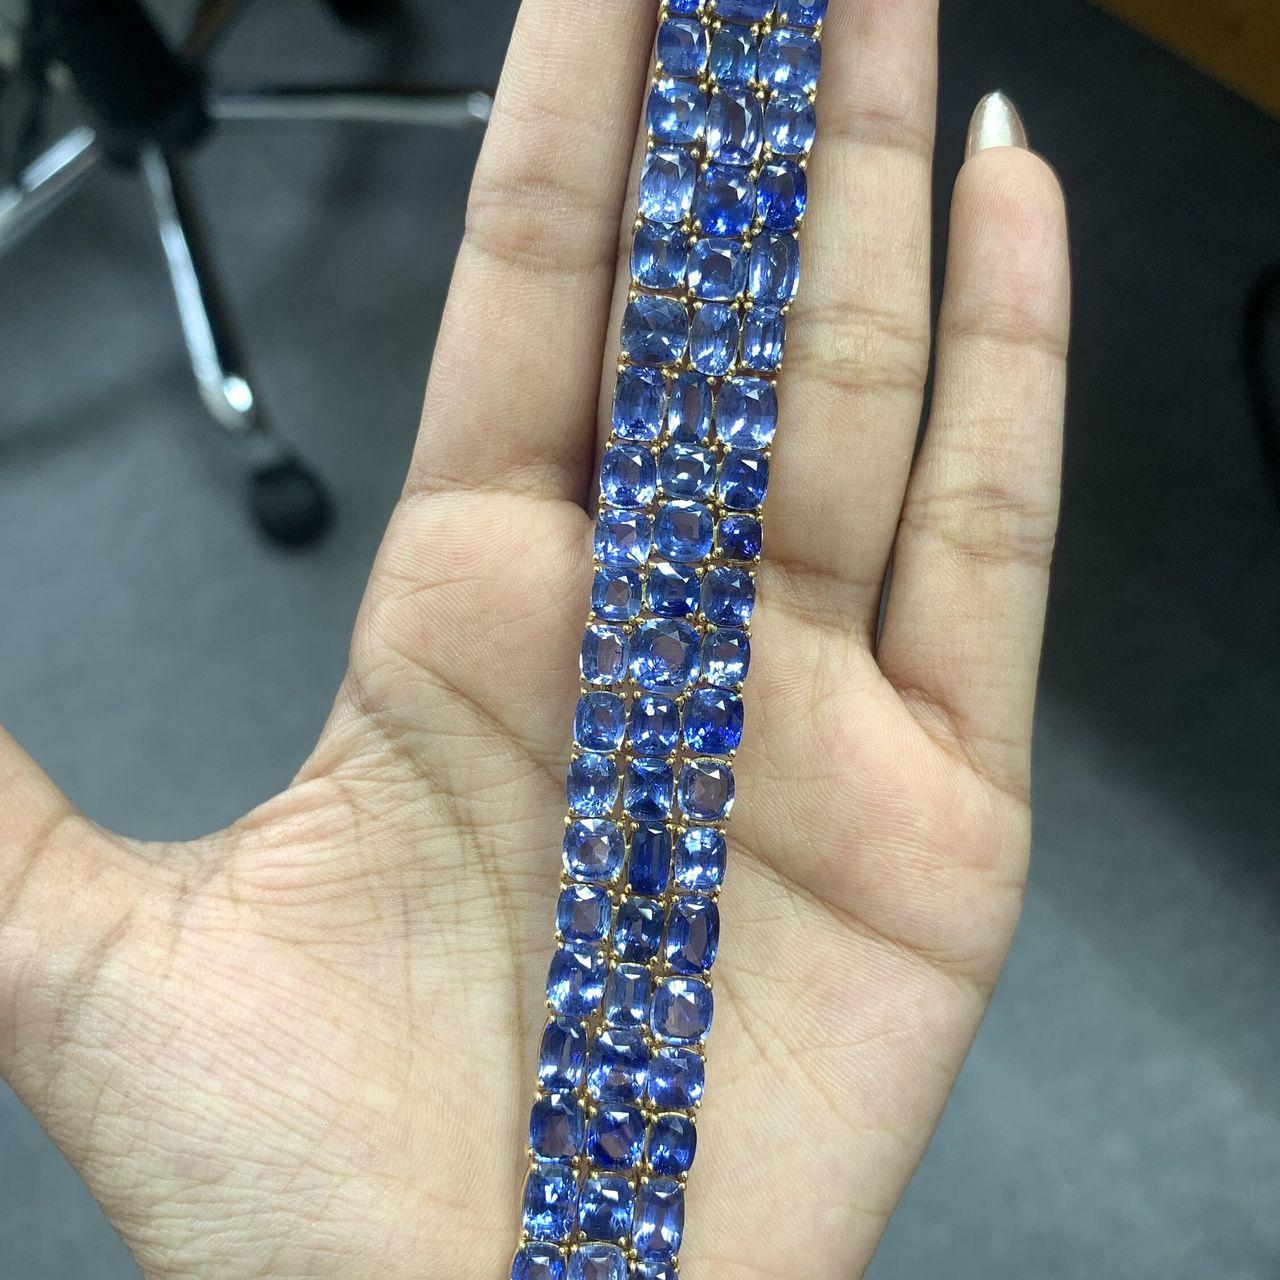 This statement bracelet boasts 66.4 carats of exquisite Ceylon Blue Sapphires, each cushion-shaped and sourced from Sri Lanka. Enhanced through gentle heat treatment, these sapphires gleam with captivating allure. The bracelet itself is a